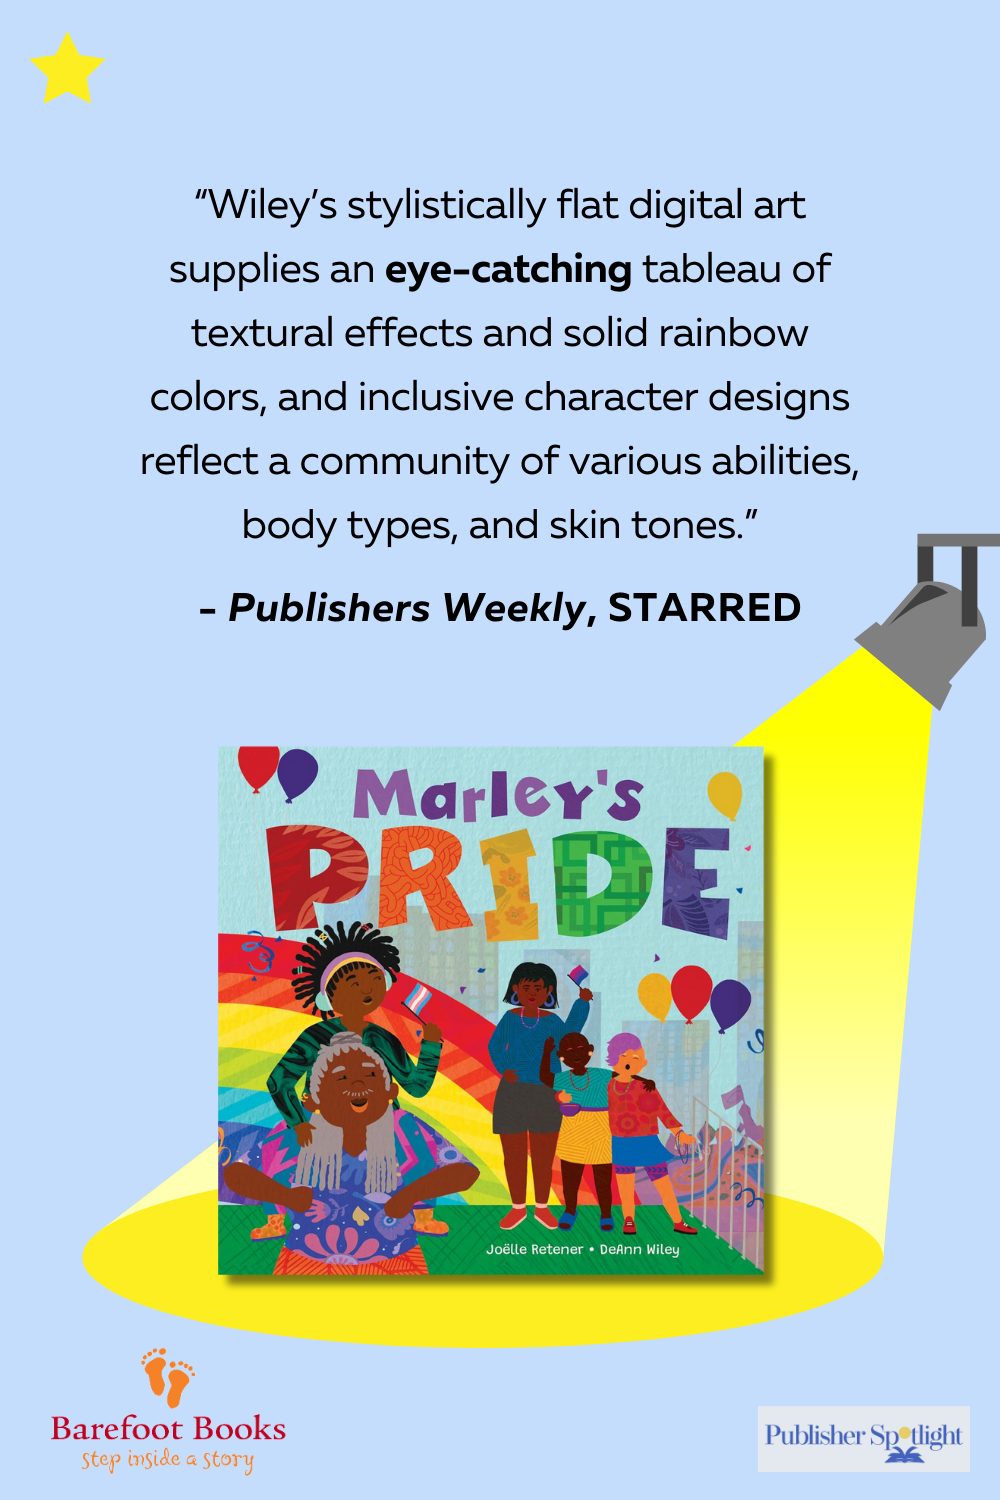 Vertical starred review graphic for Marley's Pride